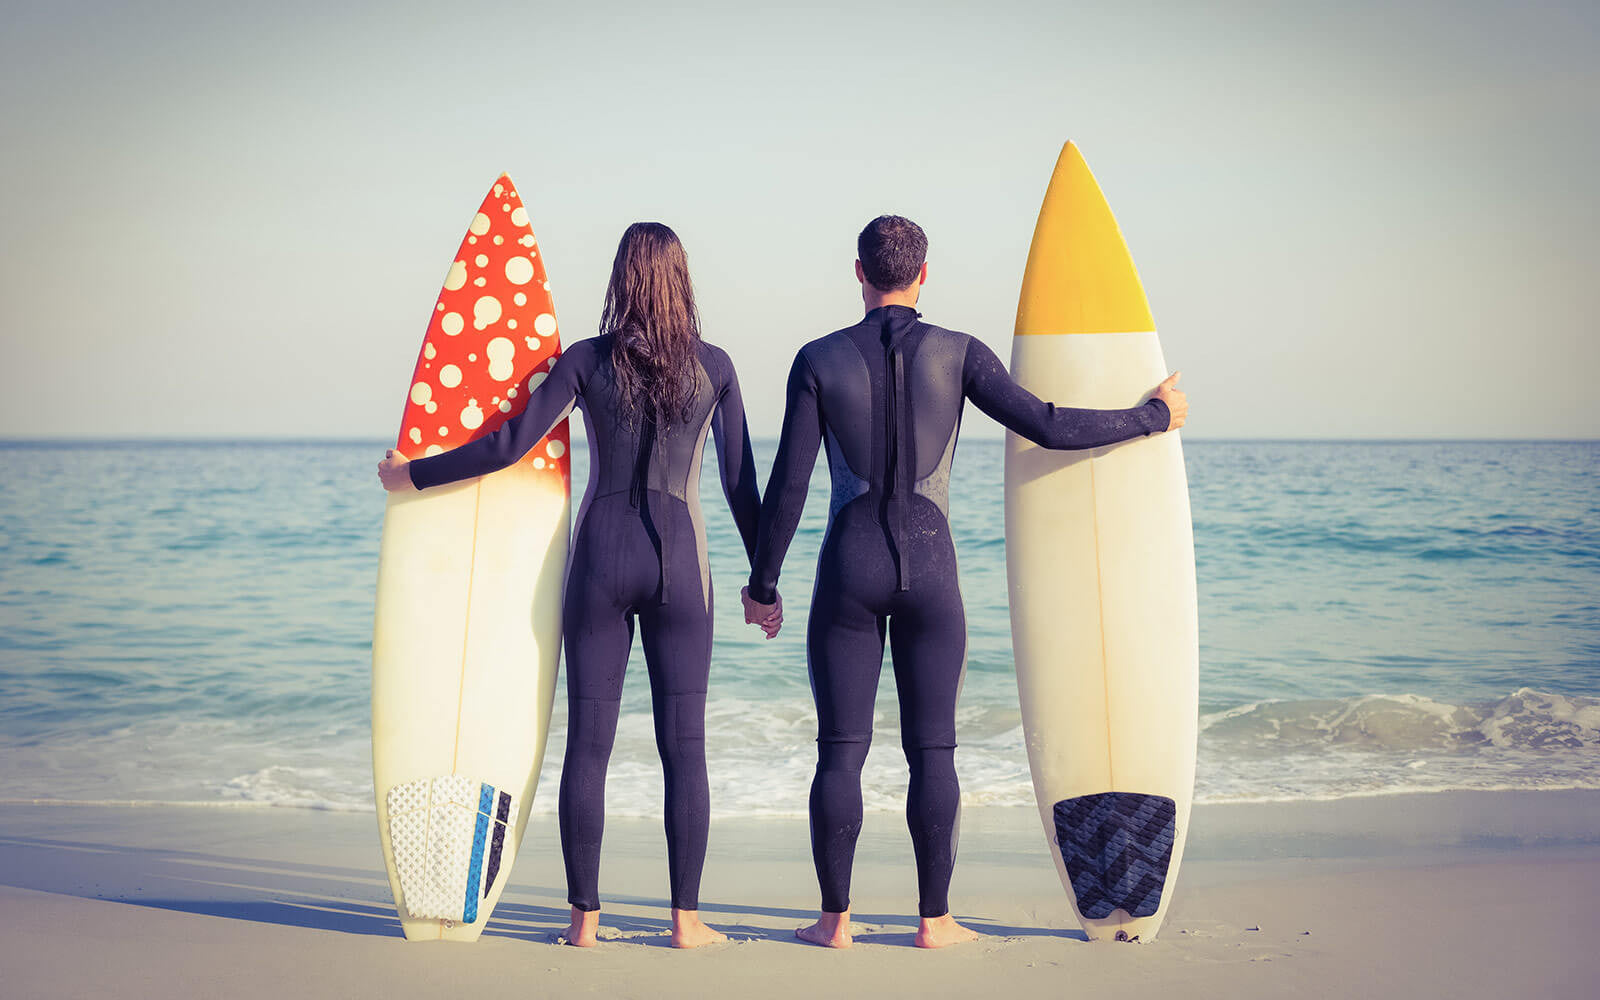 Wave Surfing together is the ultimate adventure!